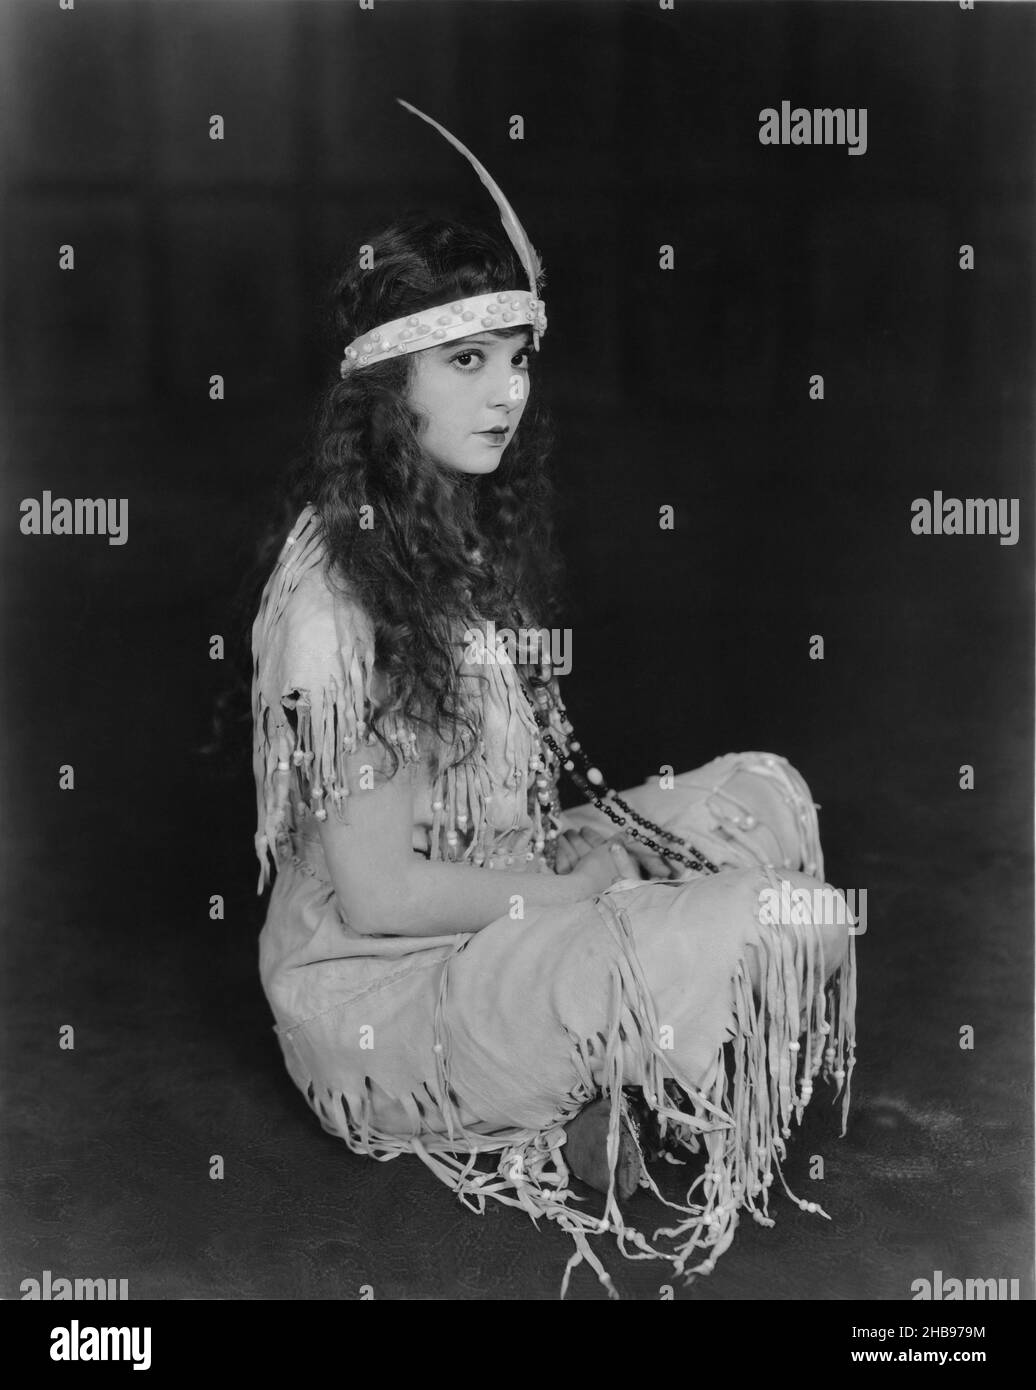 Madge Bellamy in Indian clothes and headband with a feather. She was a leading lady in film in the 1920's - 1930's. Circa 1925 Stock Photo